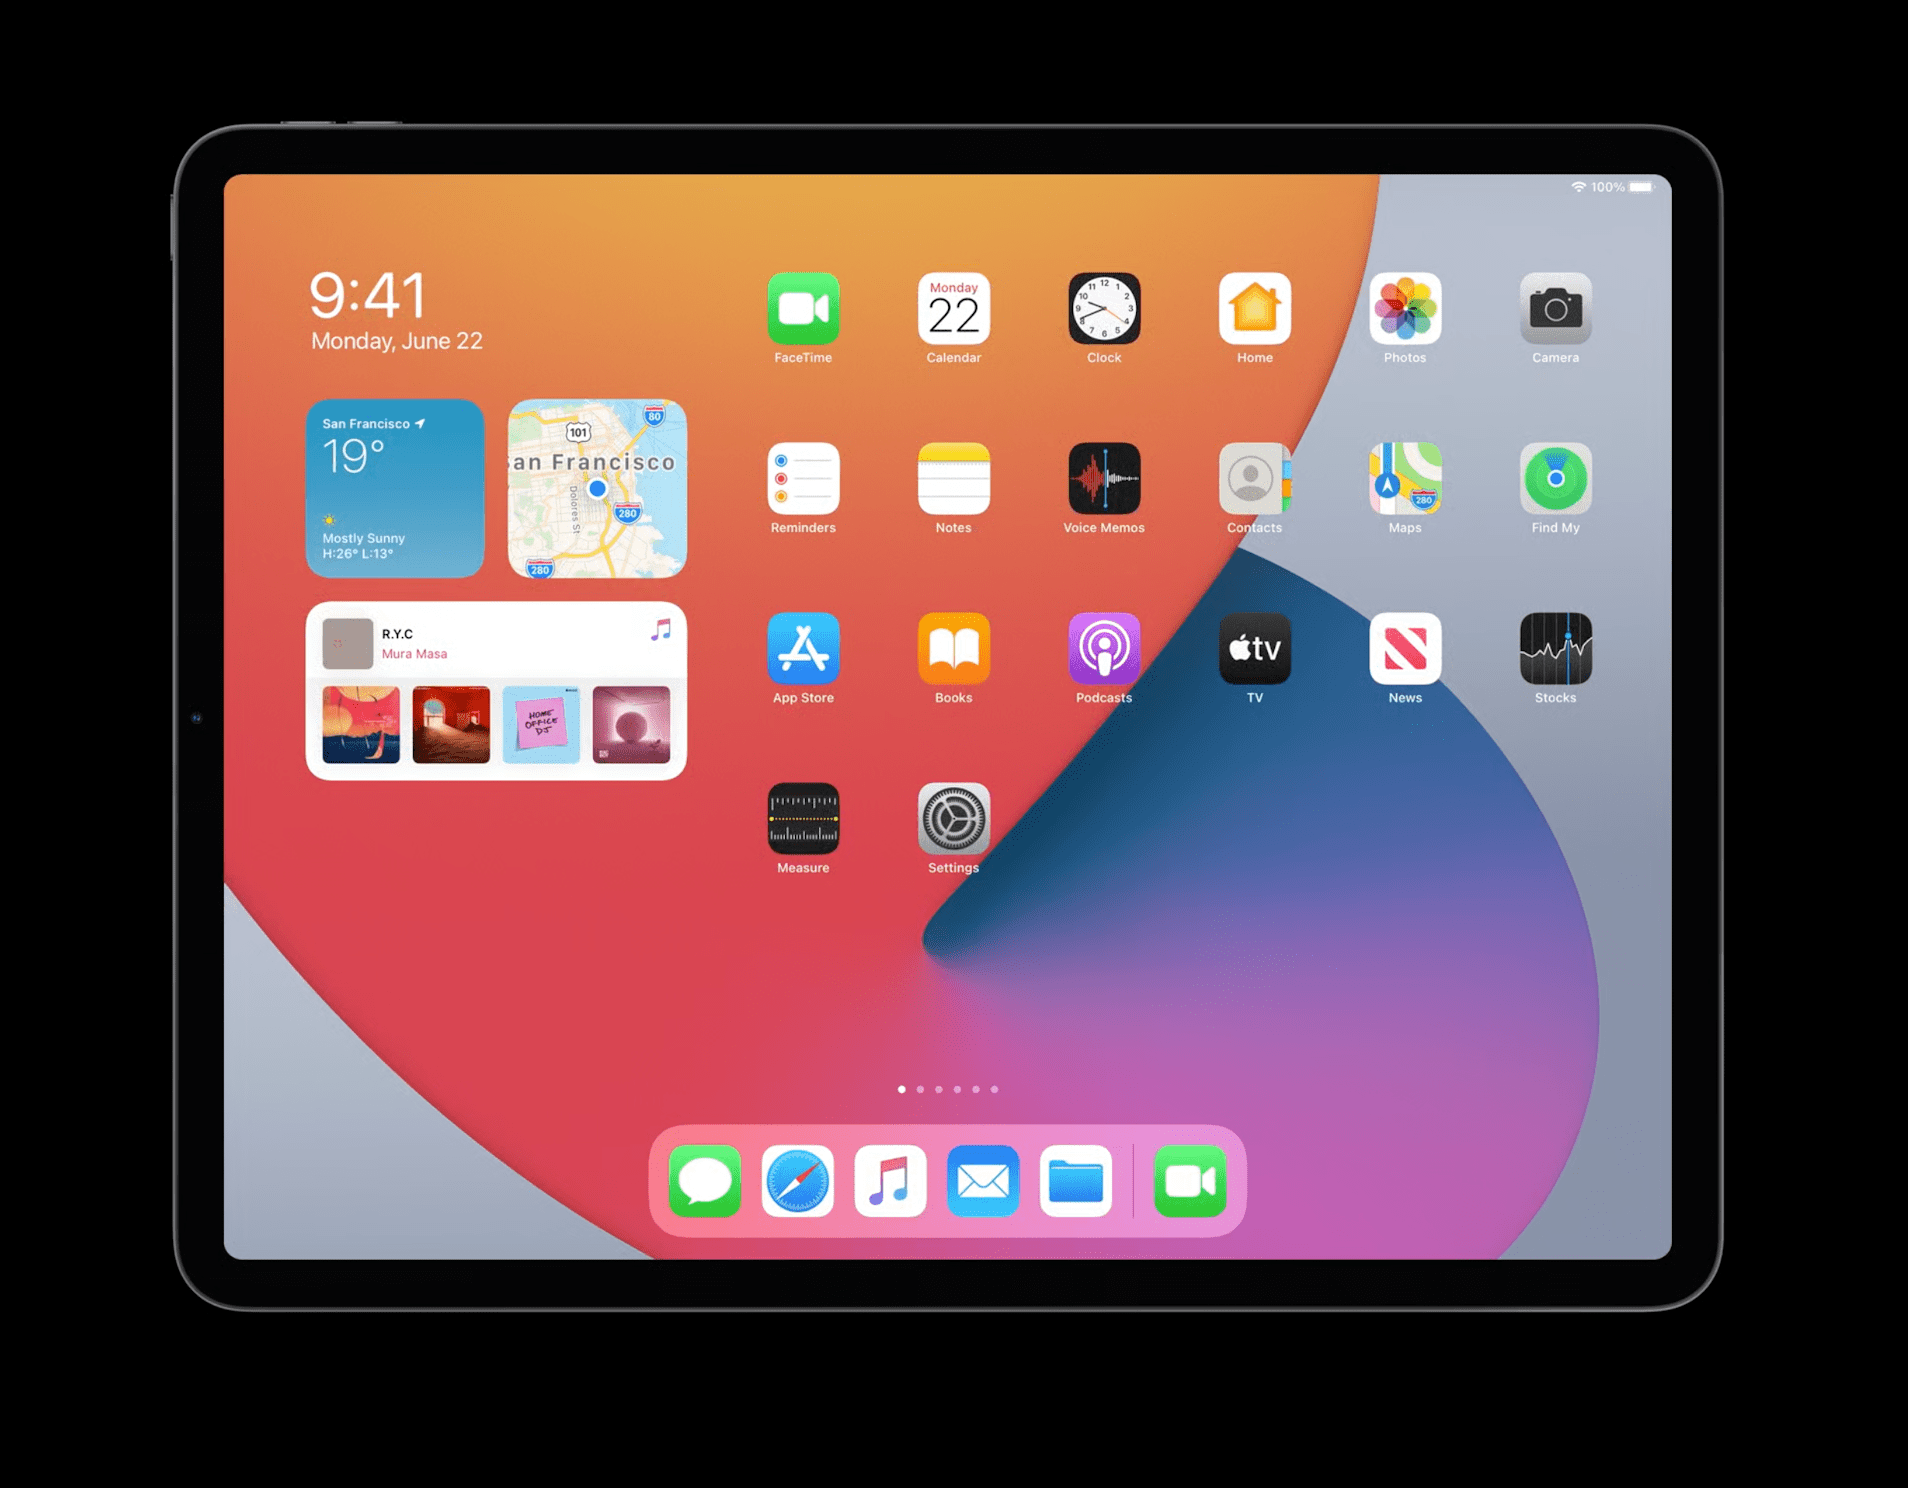 Amazing iOS 15 concept shows completely redesigned control center, rounded icons and much more